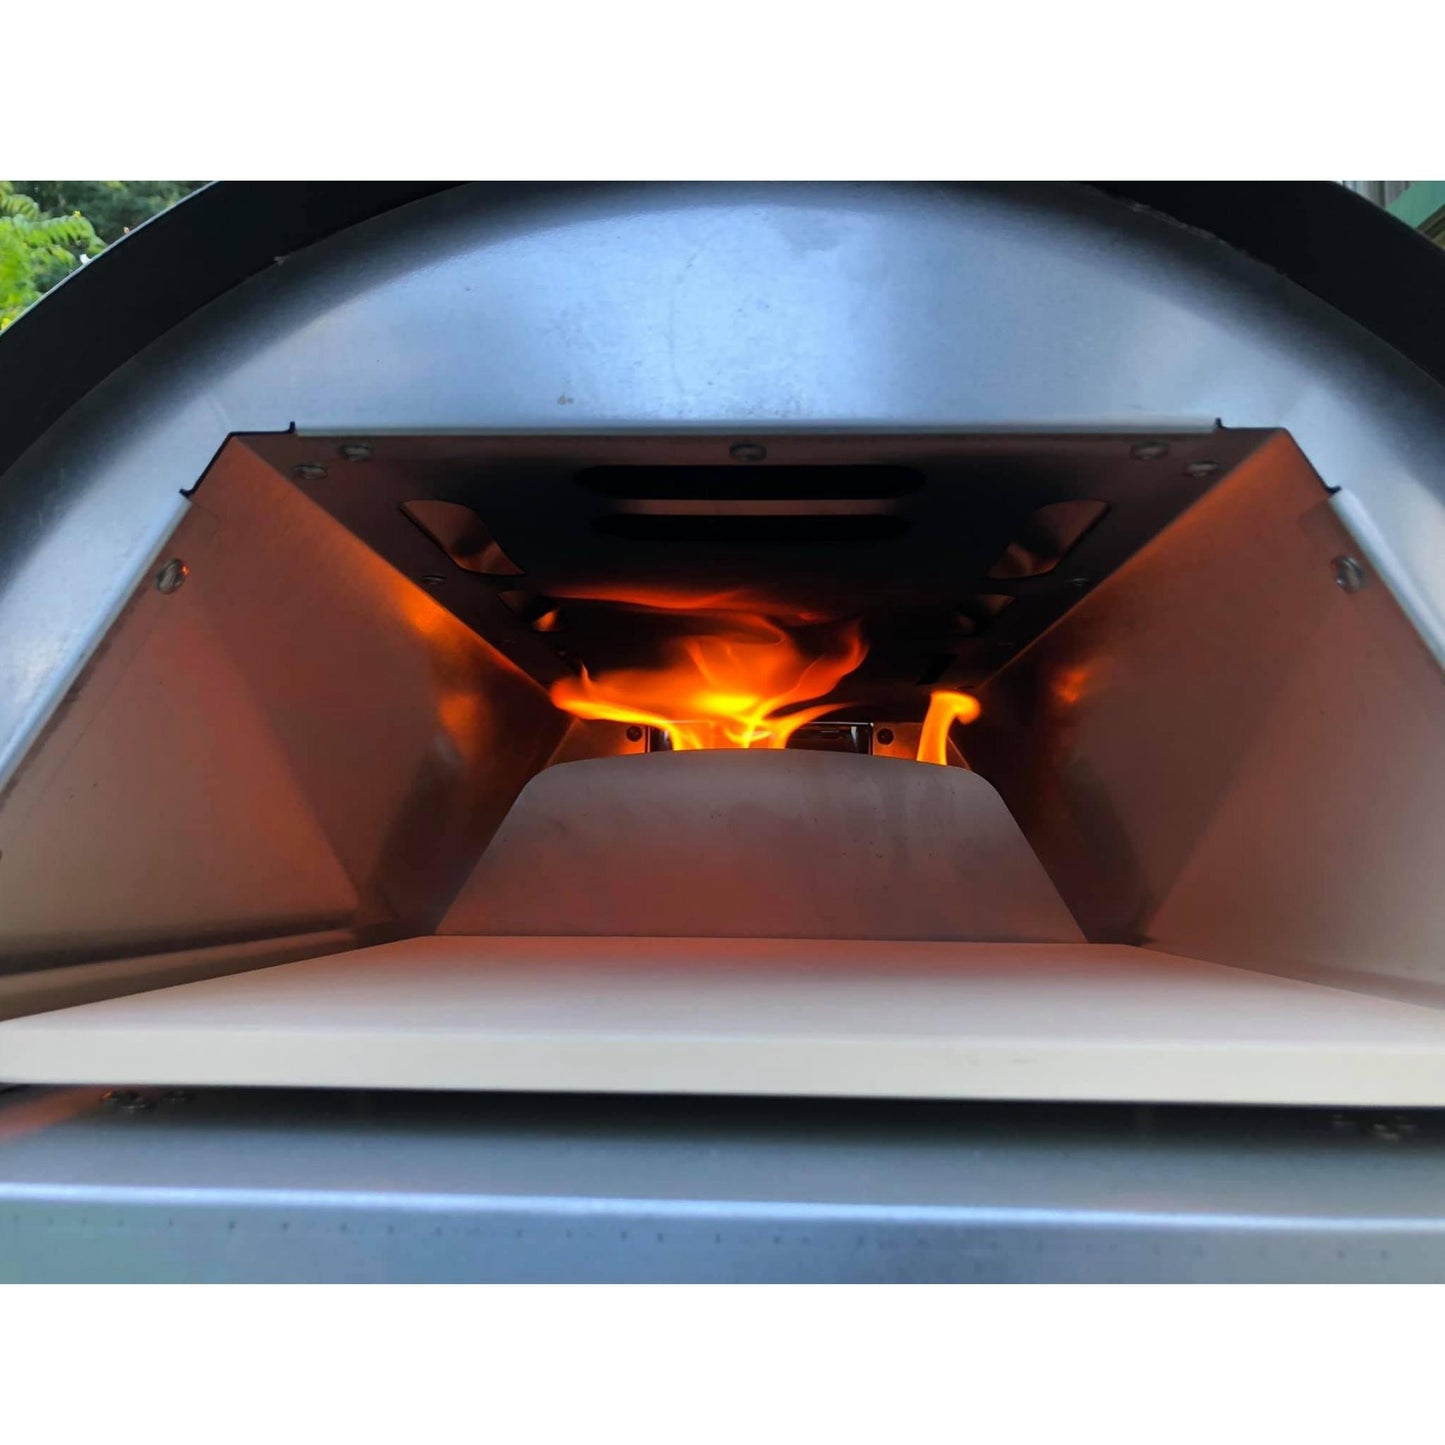 
                  
                    Portable Wood Fired Pizza Oven, WPPO Le Peppe, #1 Seller. - WPPO LLC Direct
                  
                